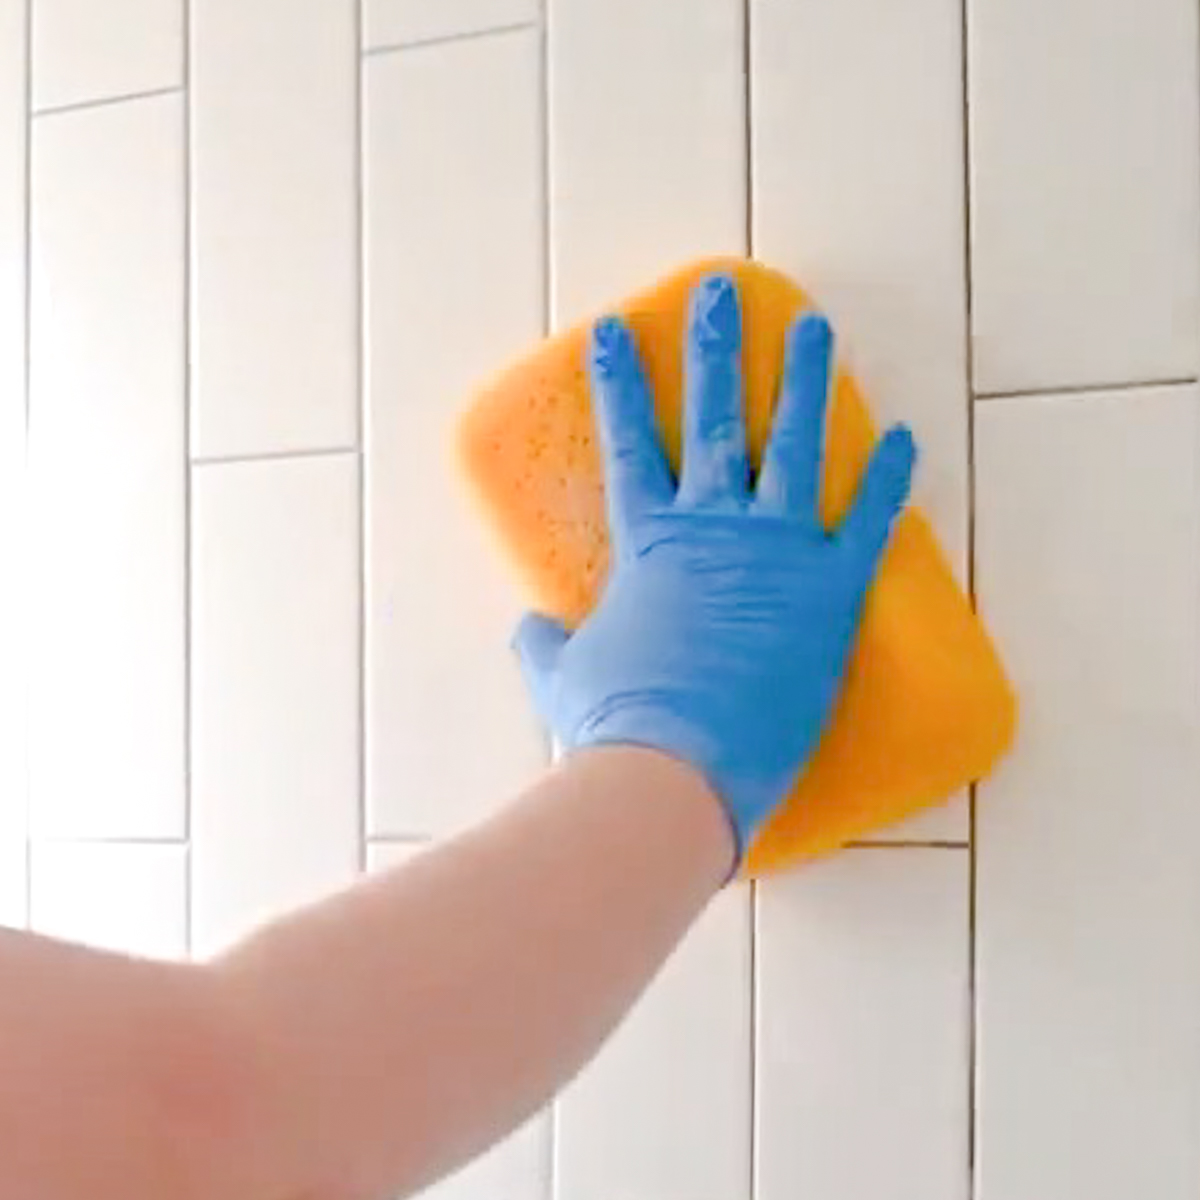 wiping grout with a sponge